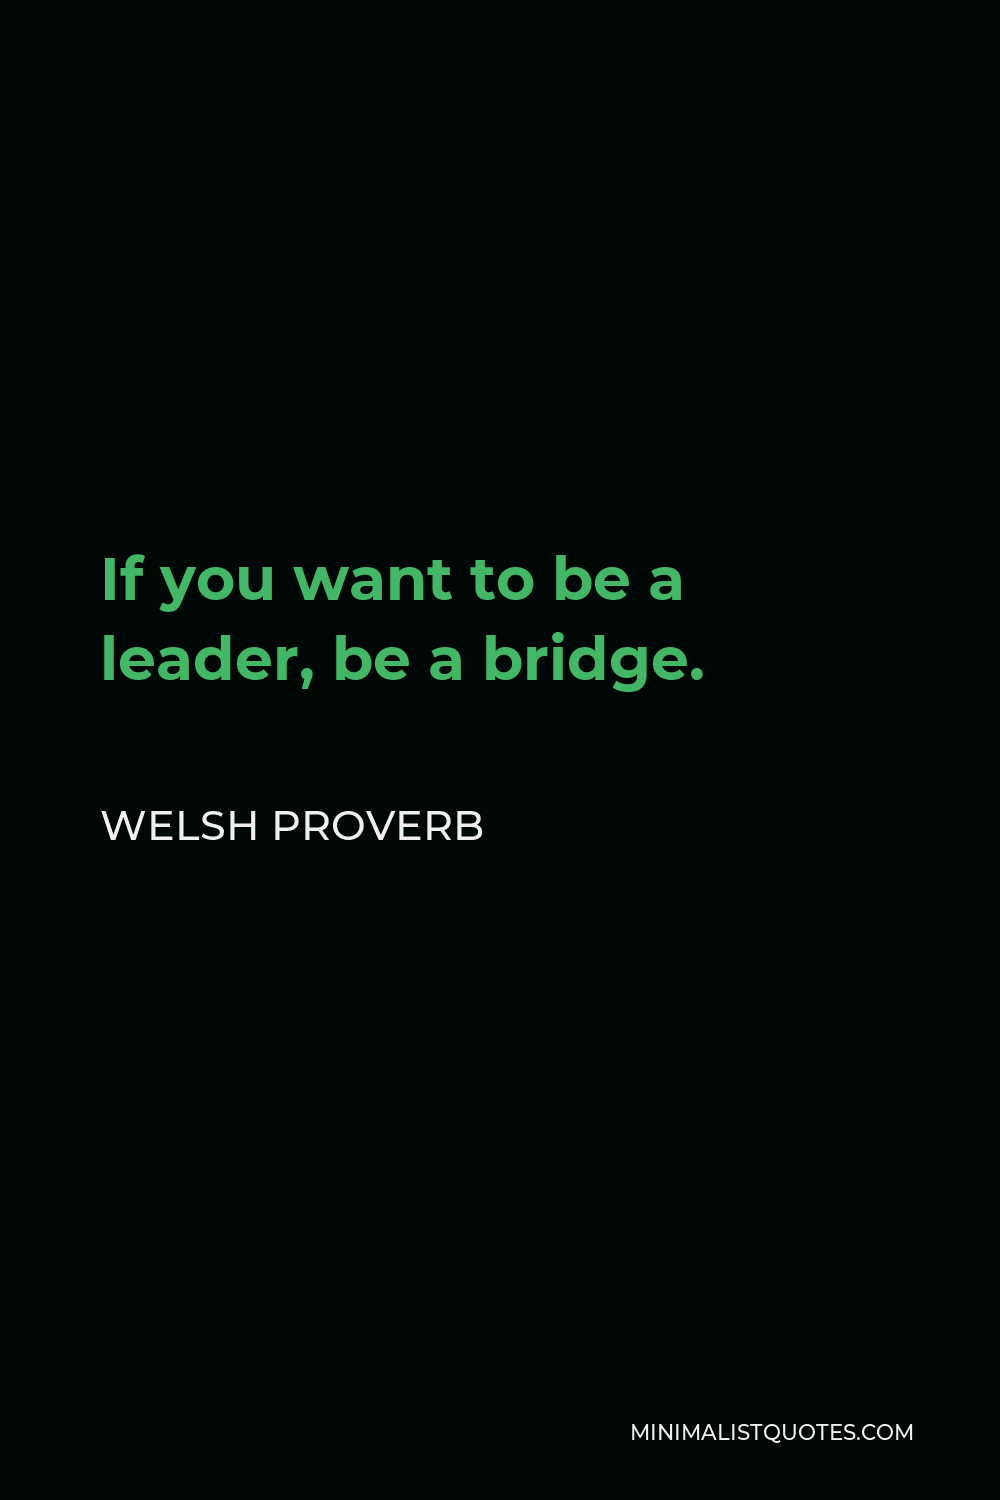 Welsh Proverb Quote - If you want to be a leader, be a bridge.